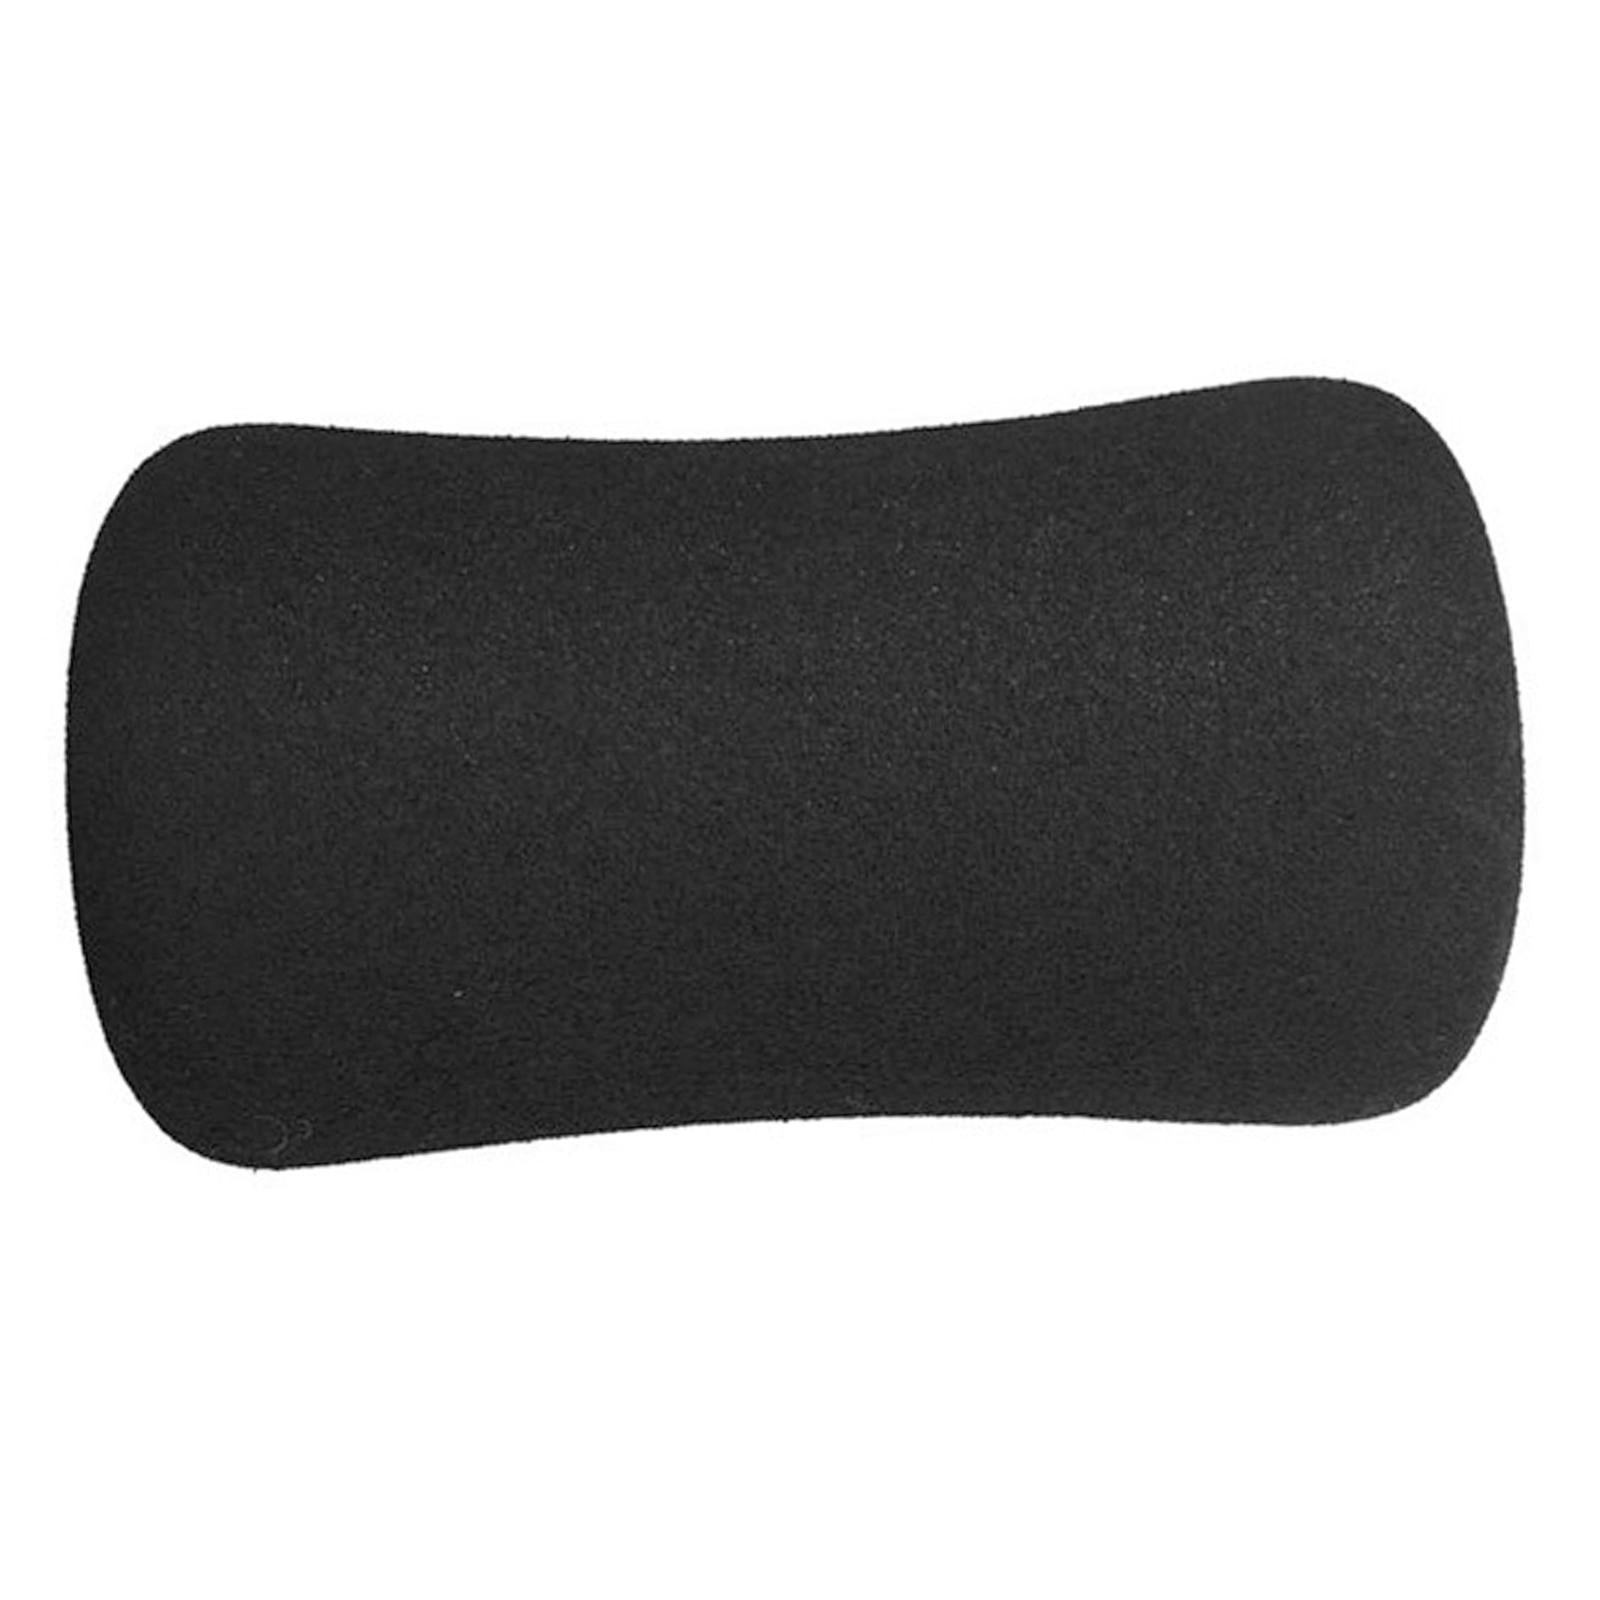 1 Pack Foam Grips for Home Gym Sit up Bar Machines Exercise Core Strength 22cm